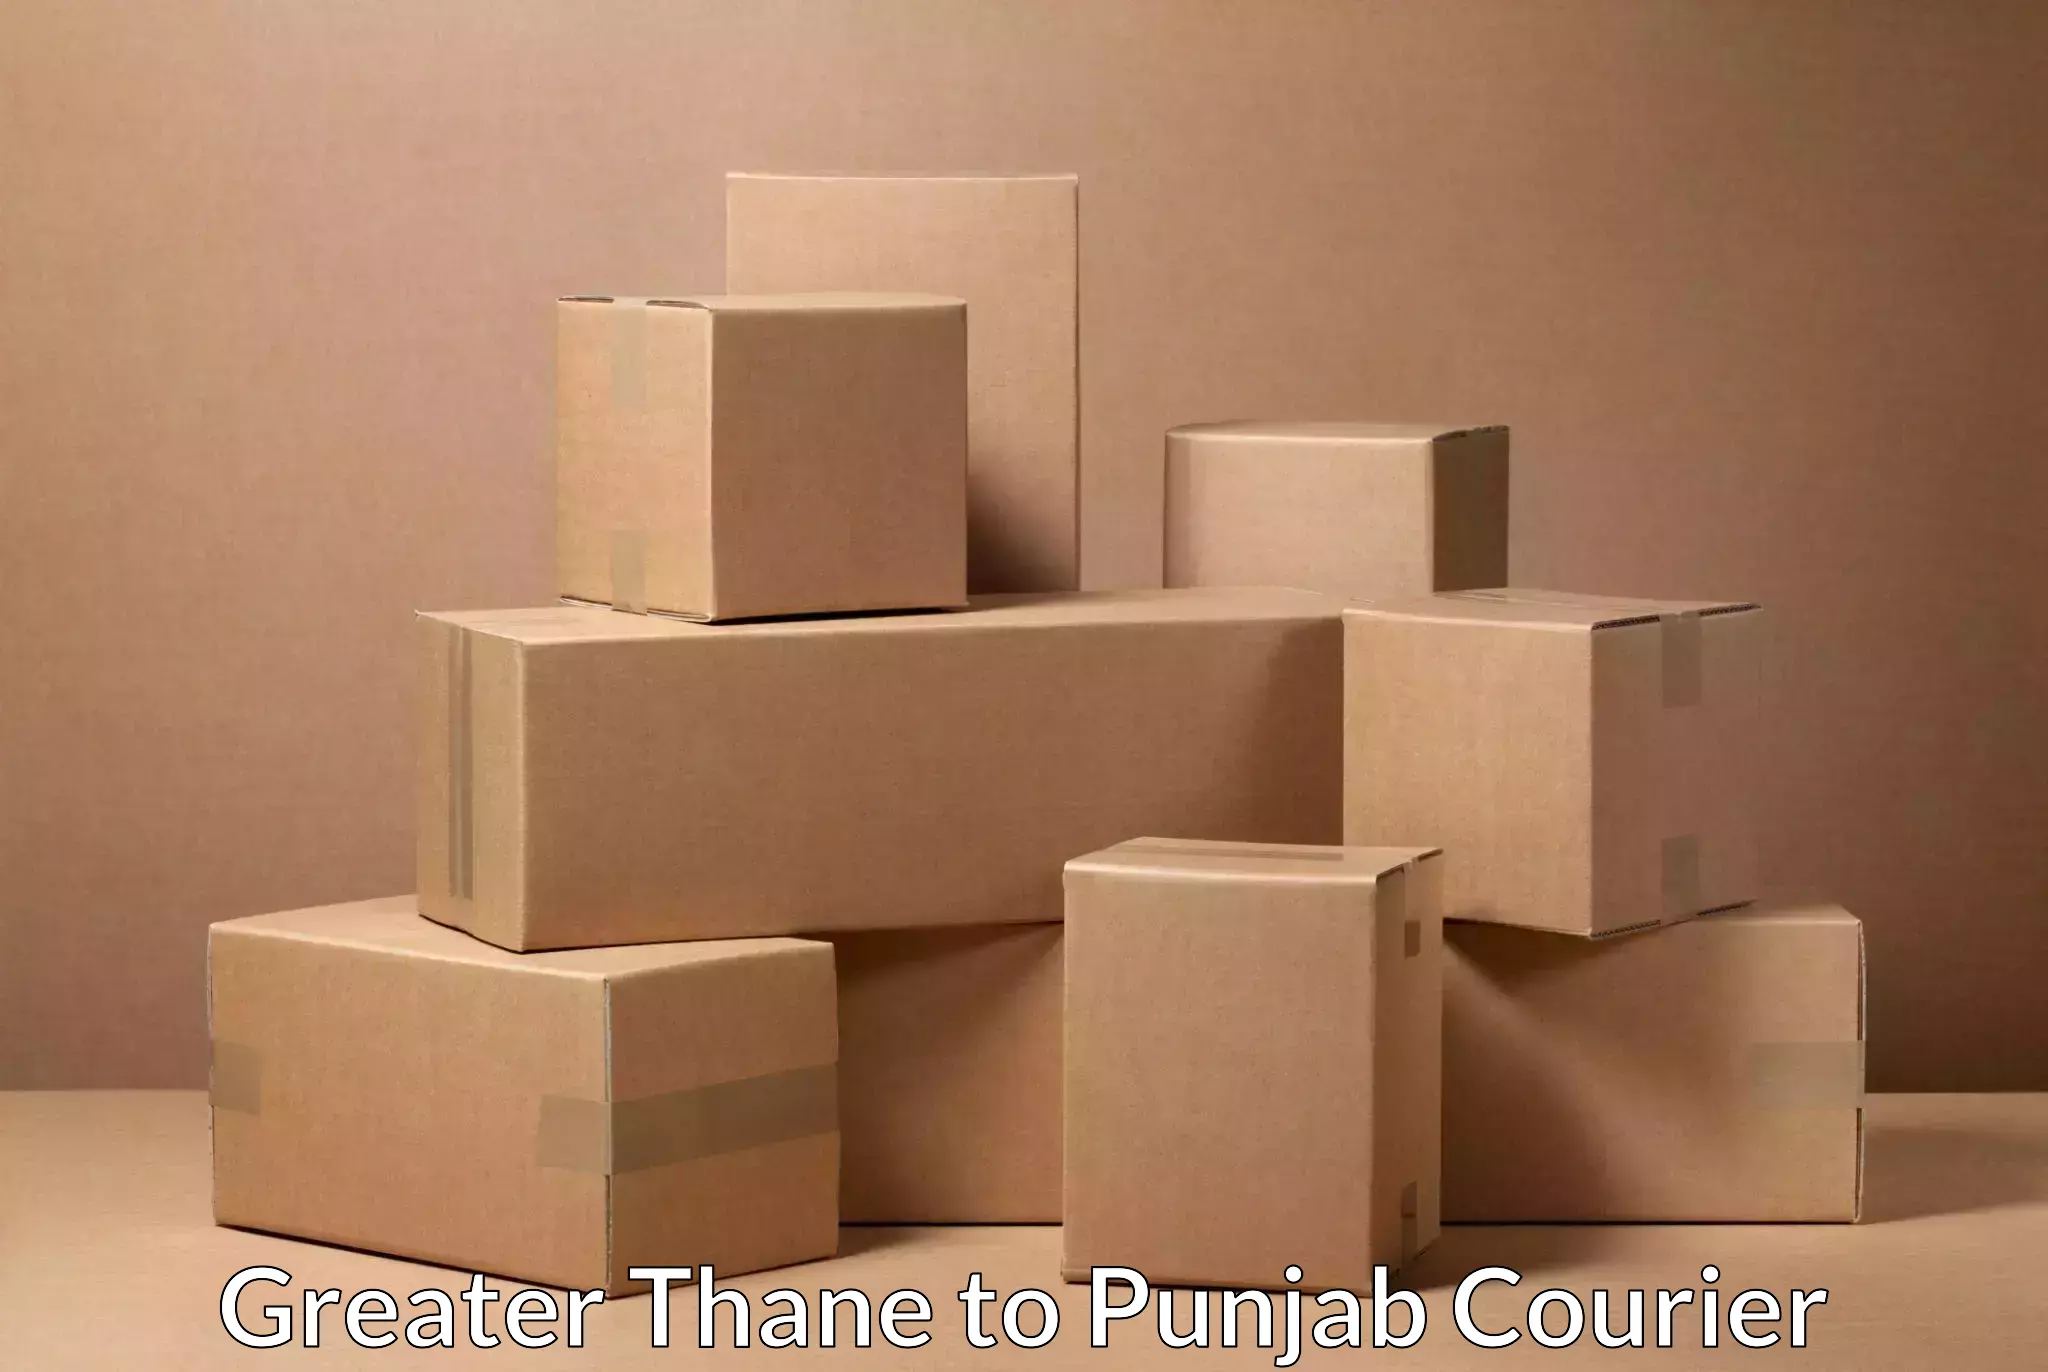 Subscription-based courier Greater Thane to Punjab